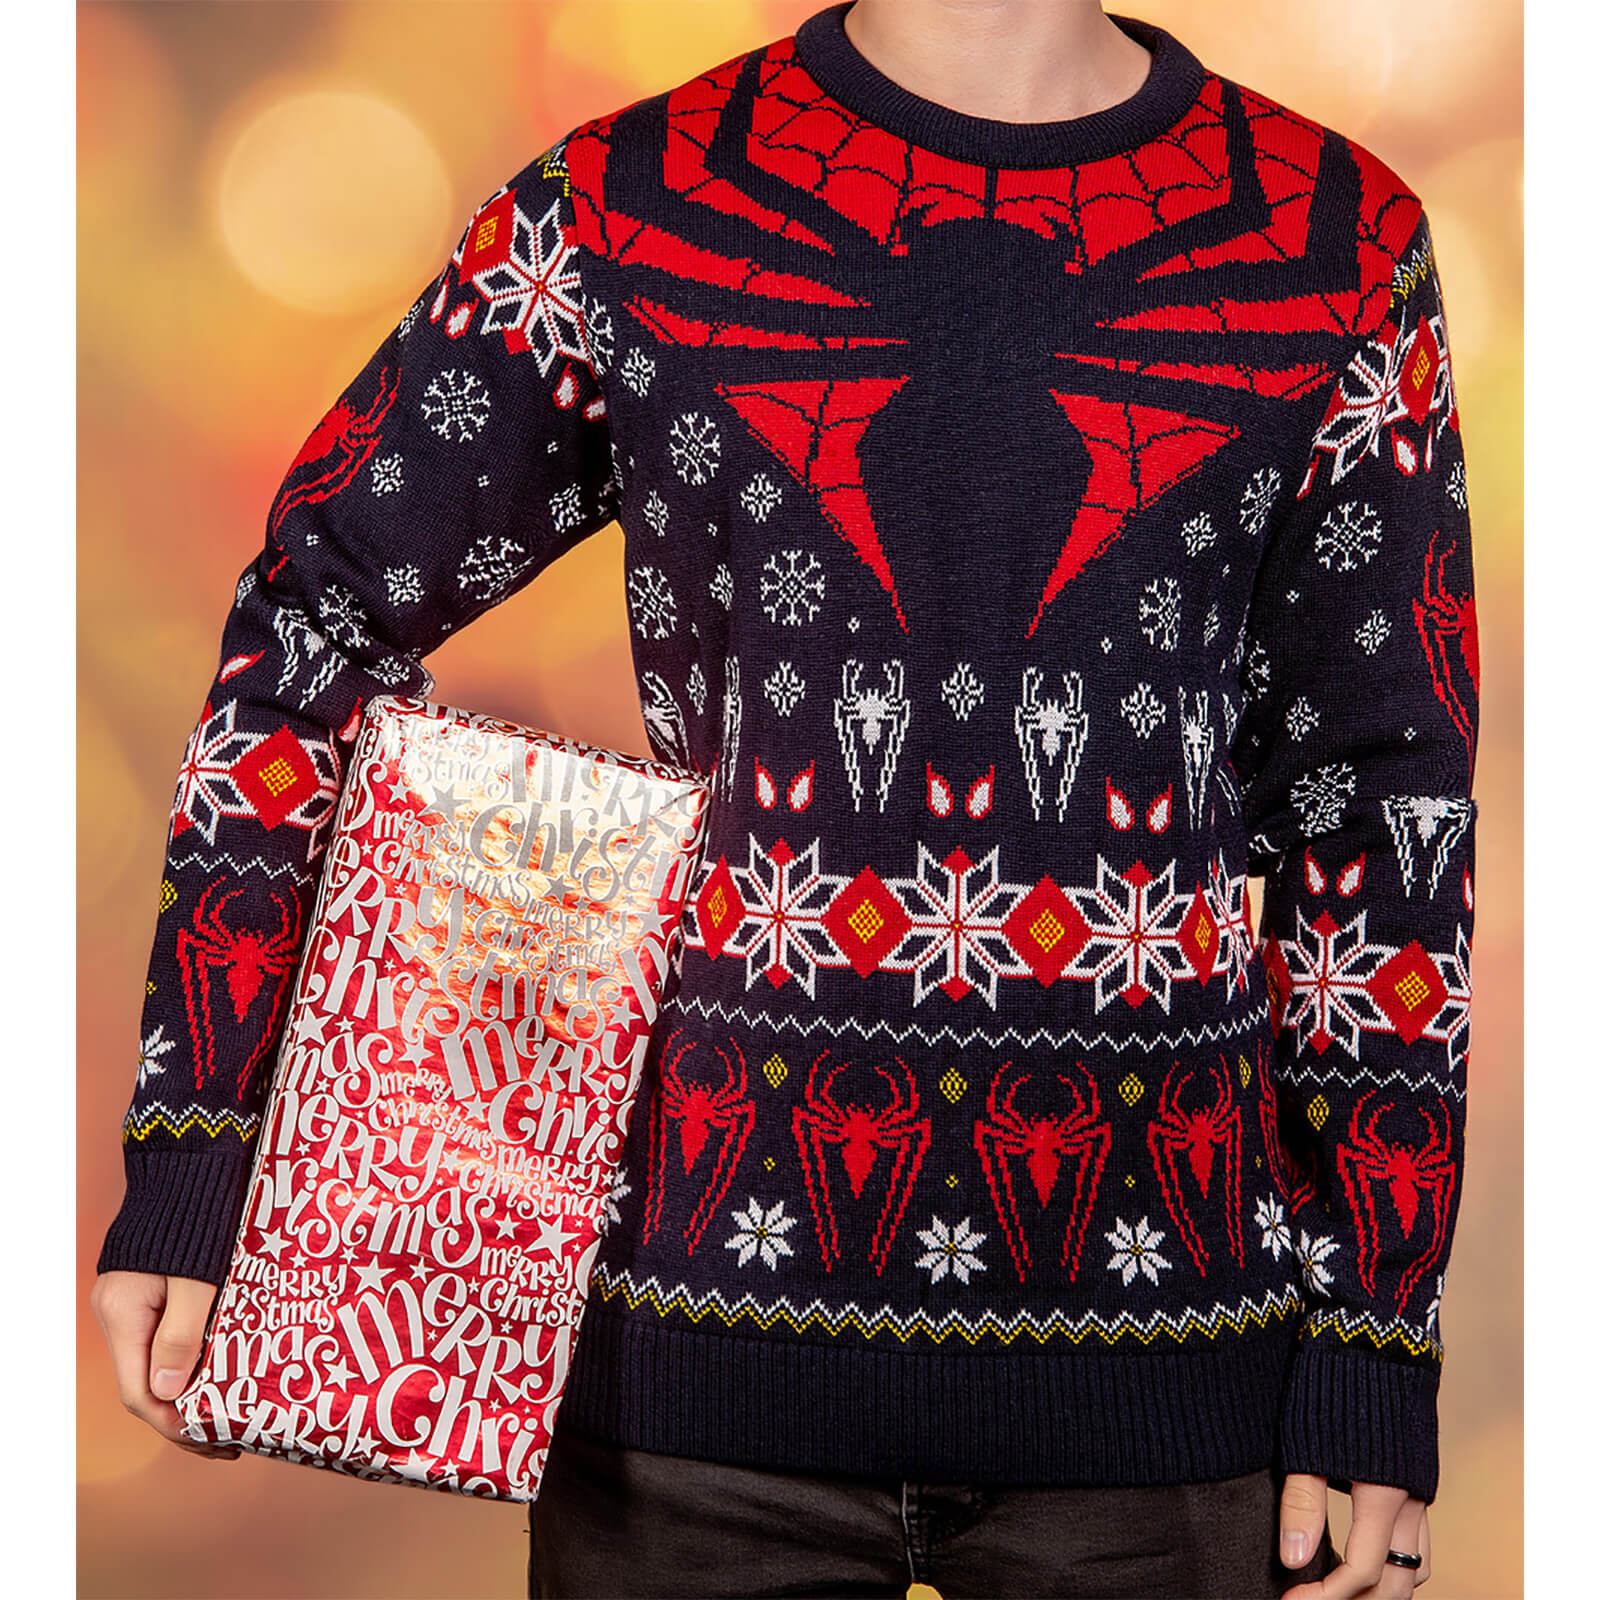 Spiderman Christmas Jumper - XL product